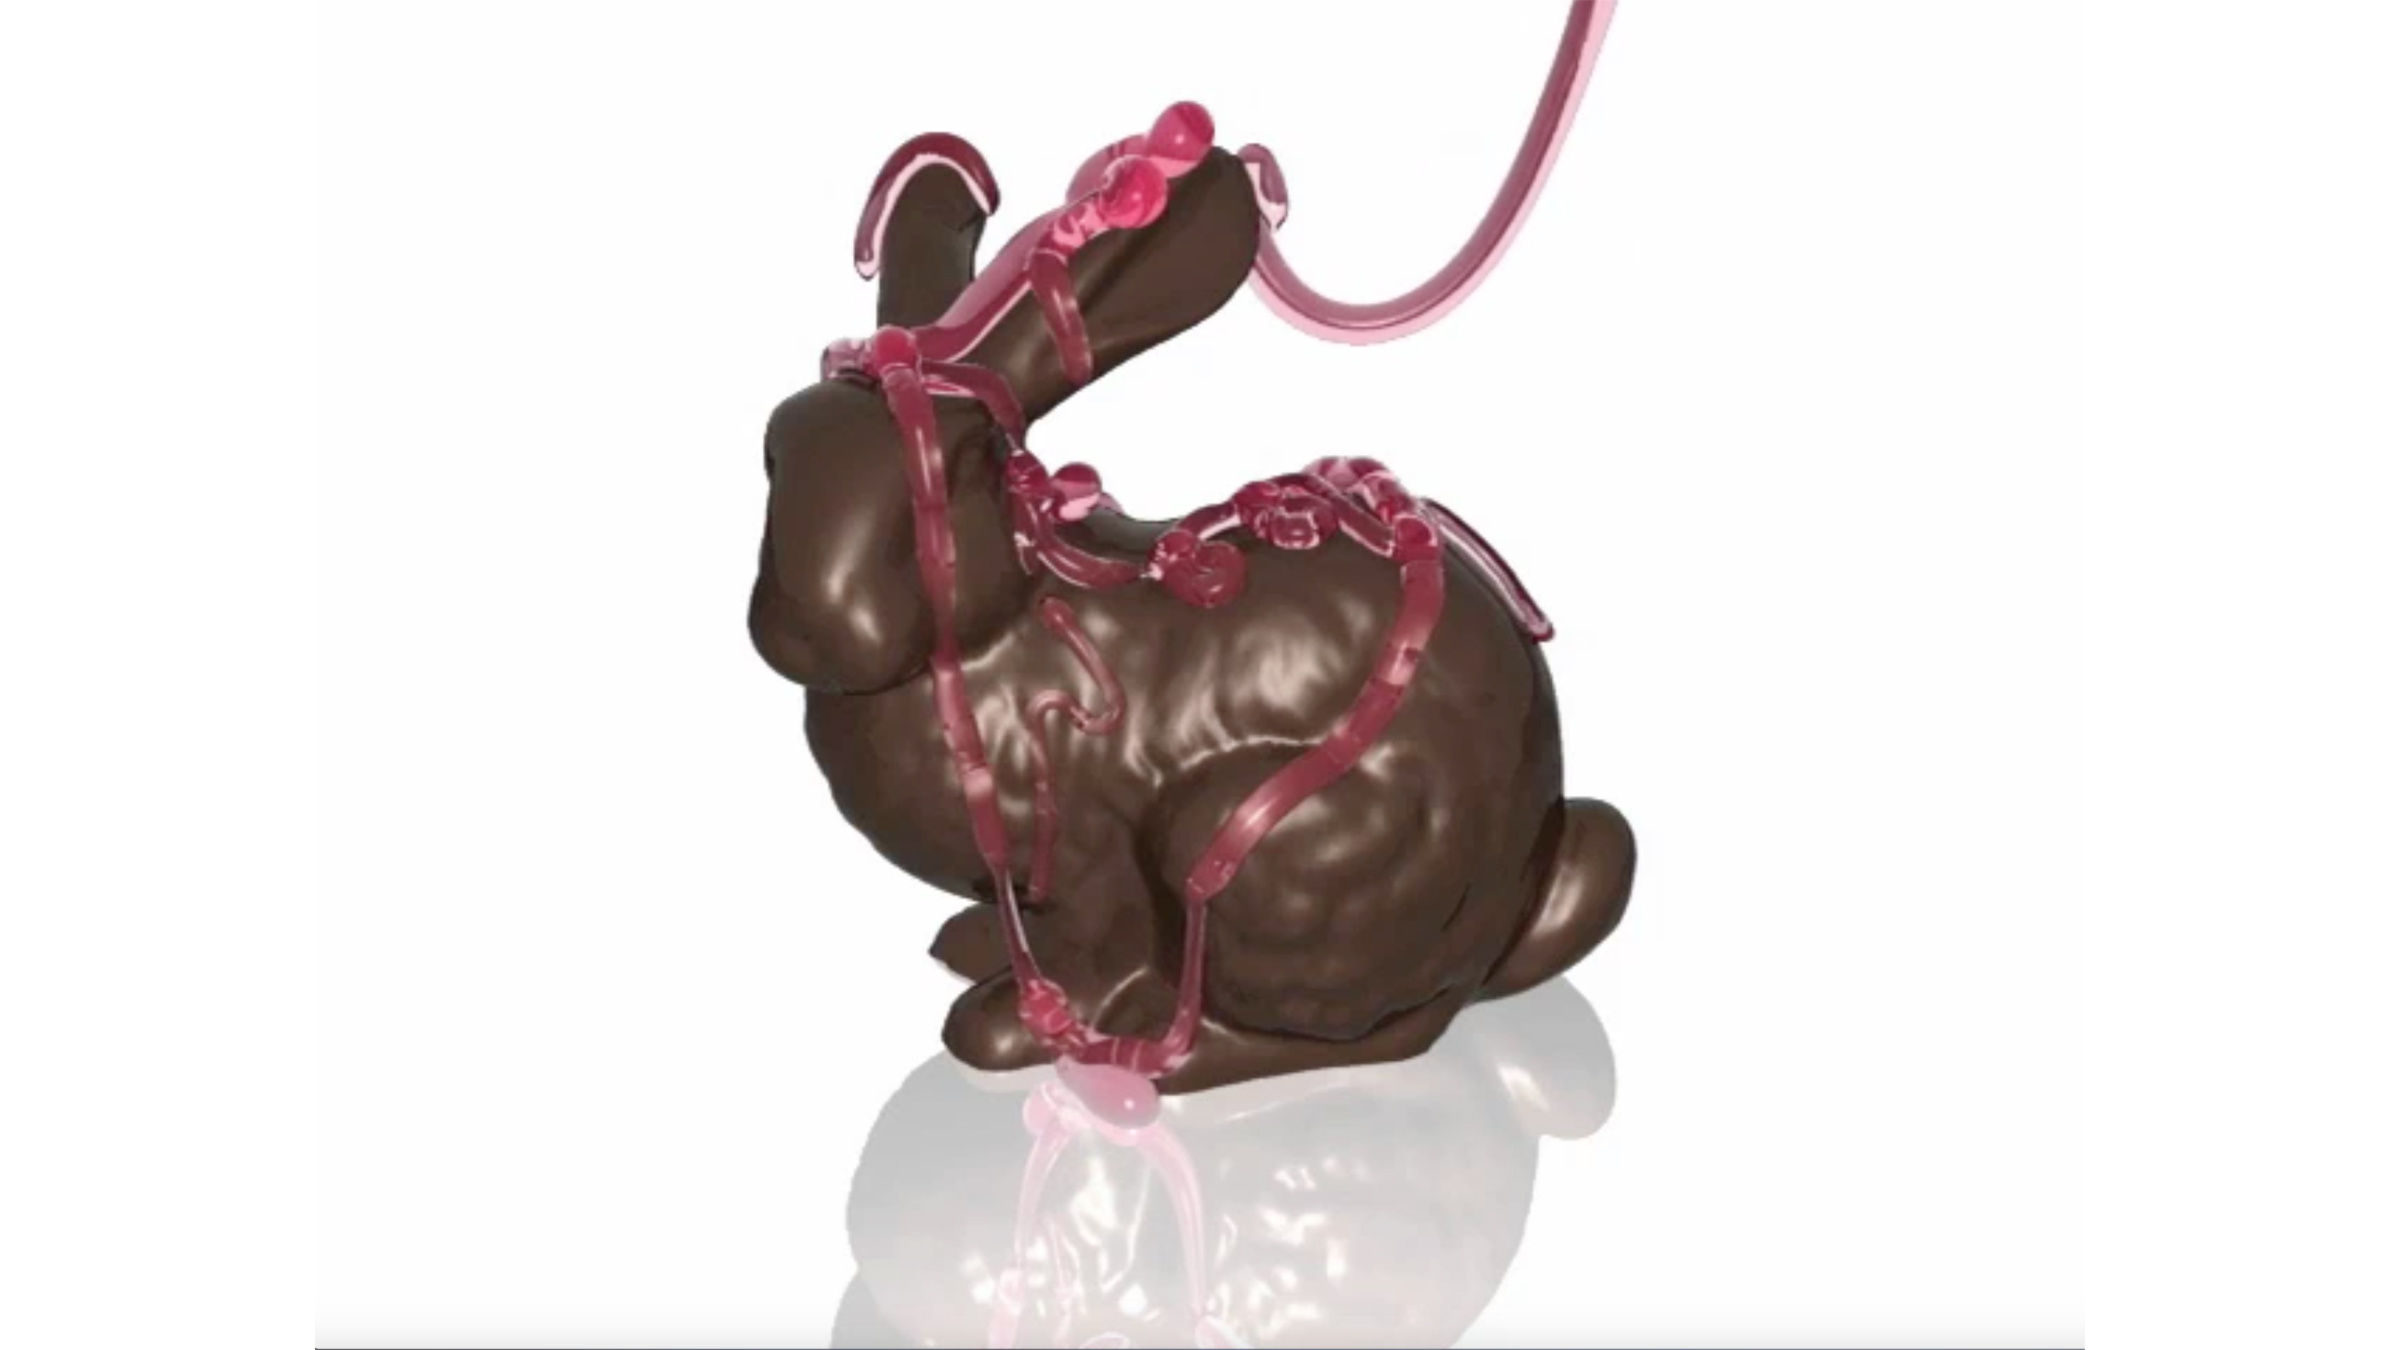 A stream of raspbrerry sauce being poured over a chocolate bunny